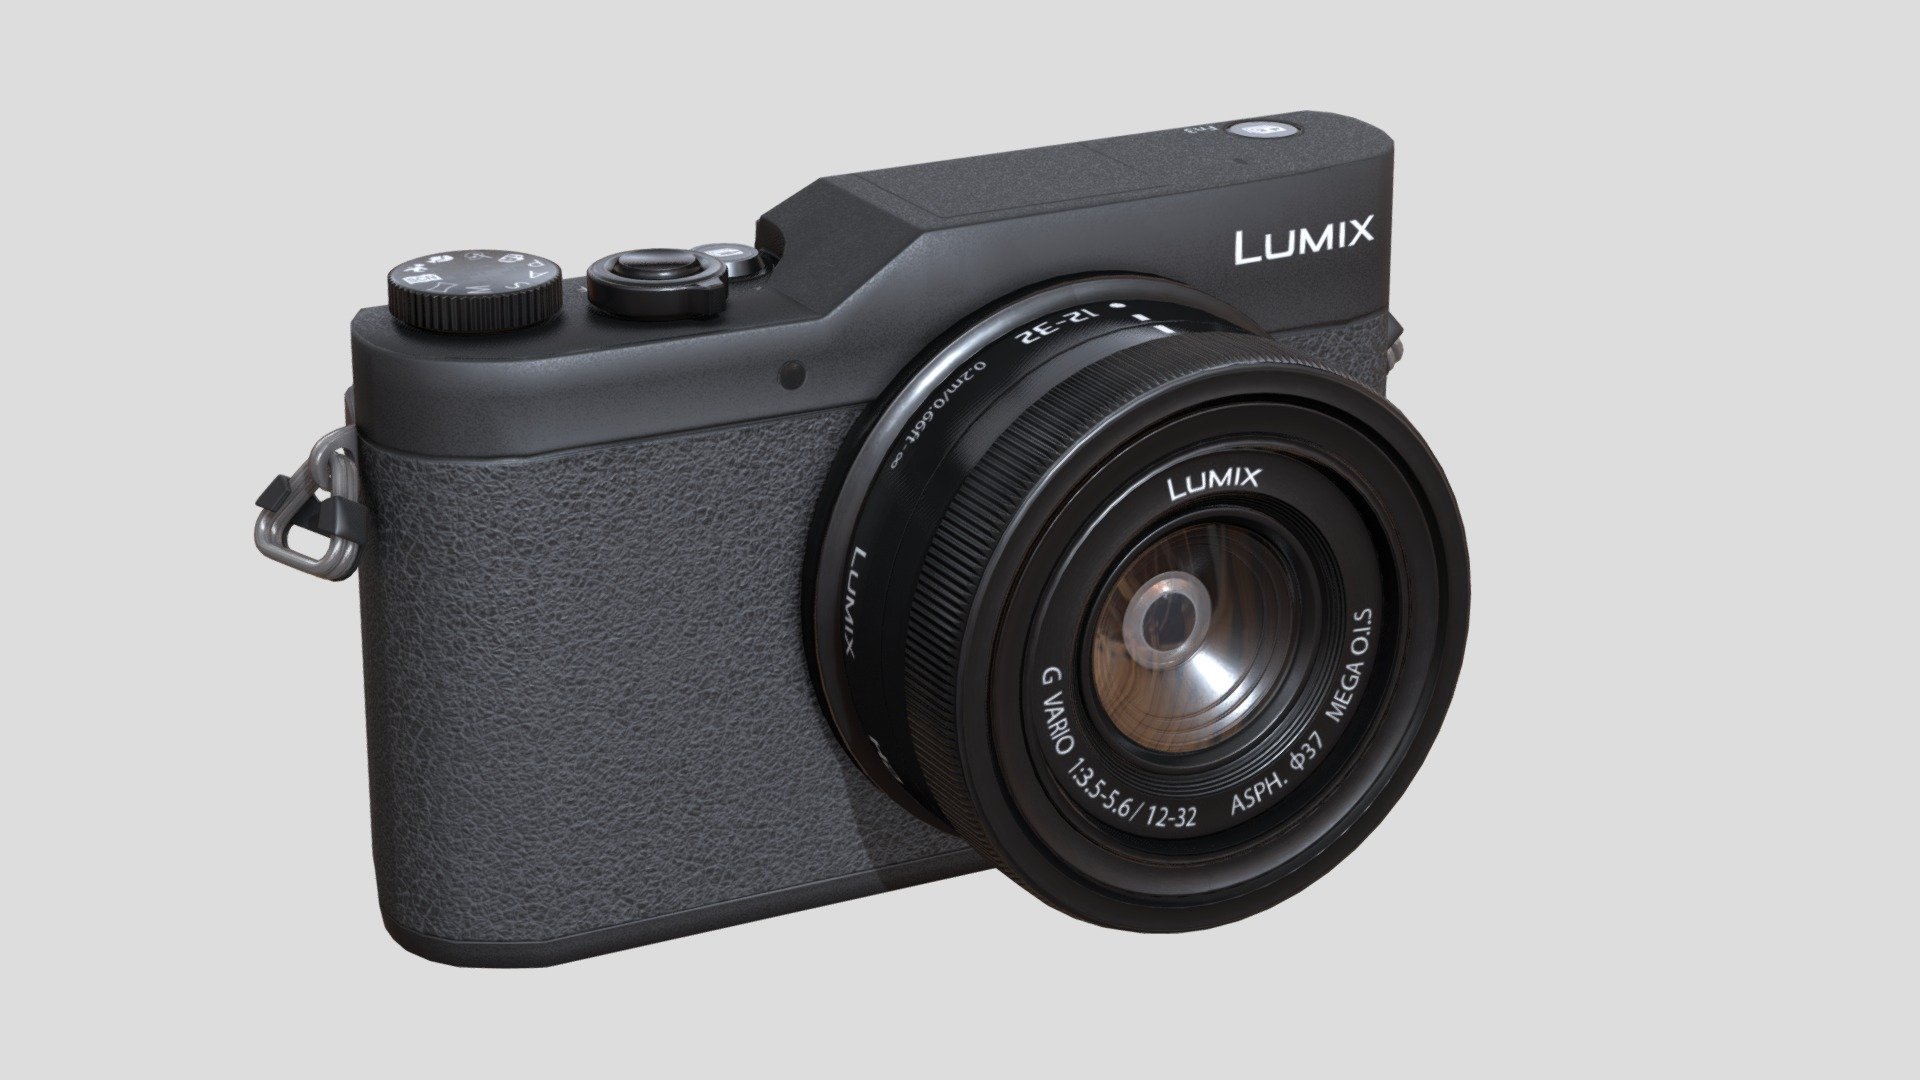 PANASONIC LUMIX GX850 4K Mirrorless Camera PBR is an optimized model with excellent texturing for best outcome.

The model has an optimized low poly mesh with the greatest possible number of simplifications that do not affect photo-realism but can help to simplify it, thus lightening your scene and allowing for using this model in real-time 3d applications.

In this product, all objects are ERROR-FREE. All LEGAL Geometry. Subdivisions are not required for this product. Real-world accurate model.


Format Type



3ds Max 2017 (Default Physical PBR Shader)

FBX

OBJ

3DS


Texture Type
2 multi/sub material used. So 2 set of textures of:




Albedo

Metalness

Roughness

Normal

Ambient Occlusion

Alpha

You might need to re-assign textures map to model in your relevant software

You might need to flip green channel of Normal map according to your relevant softwar - PANASONIC LUMIX GX850 4K Mirrorless Camera PBR - Buy Royalty Free 3D model by luxe3dworld 3d model